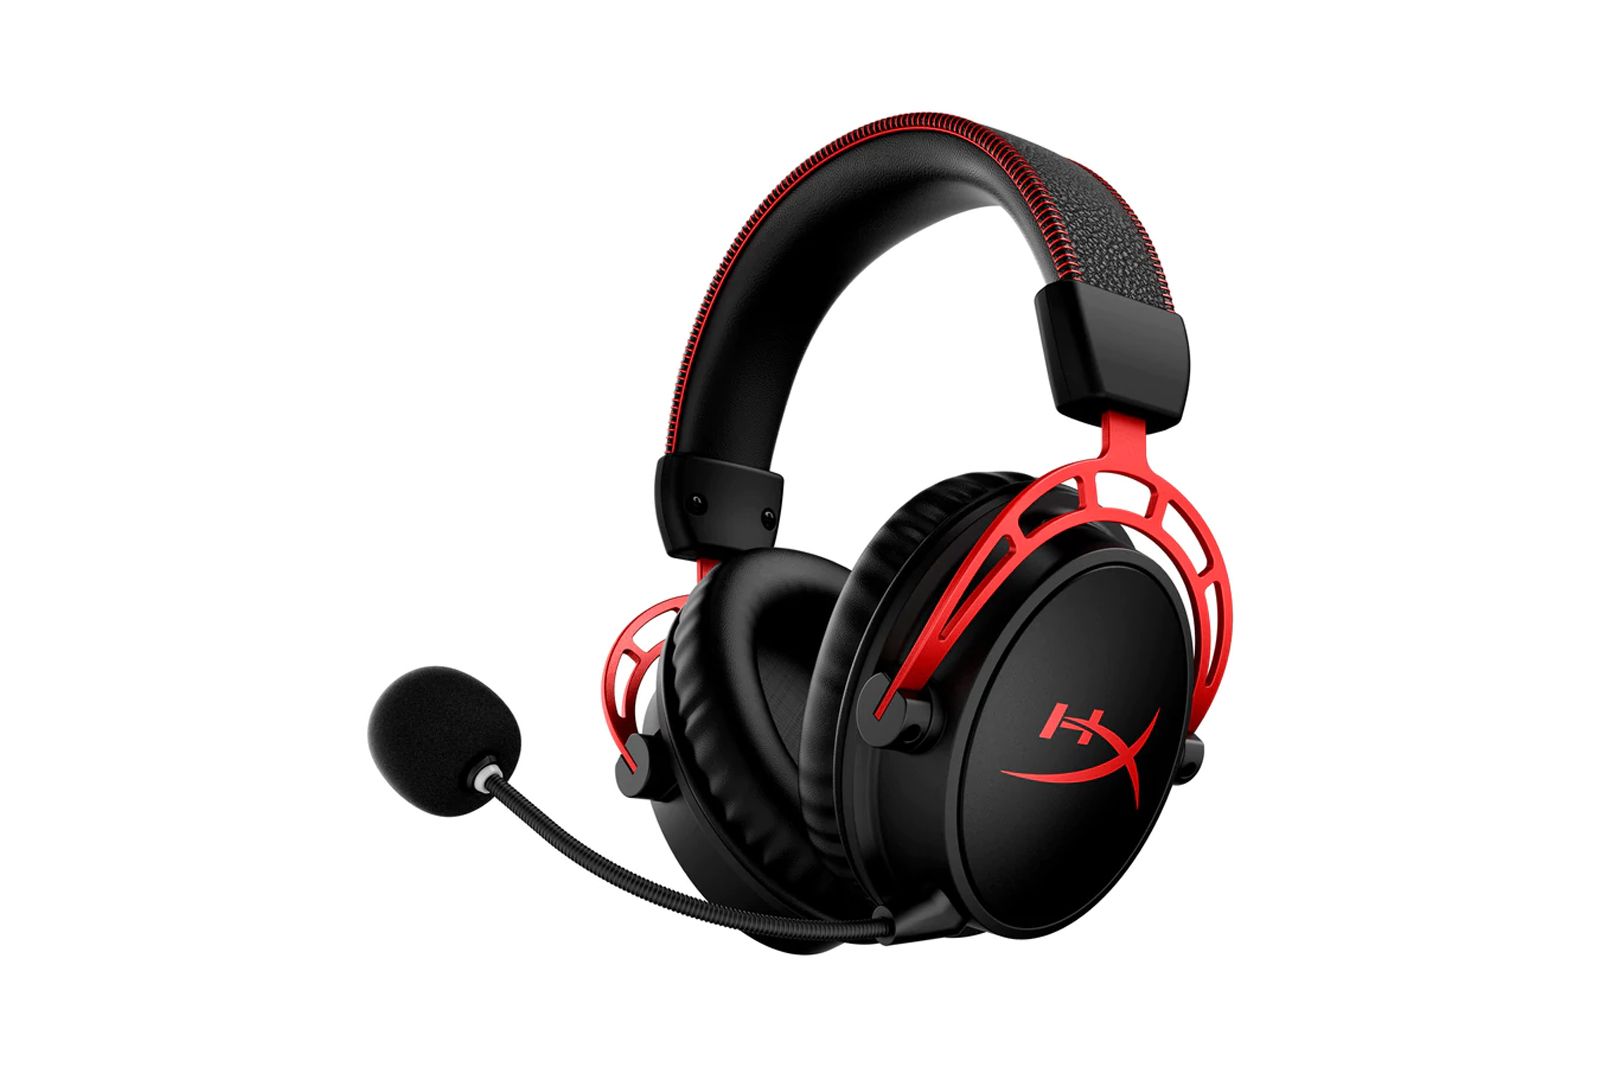 HyperX has a gaming headset for every budget - check them out here photo 1